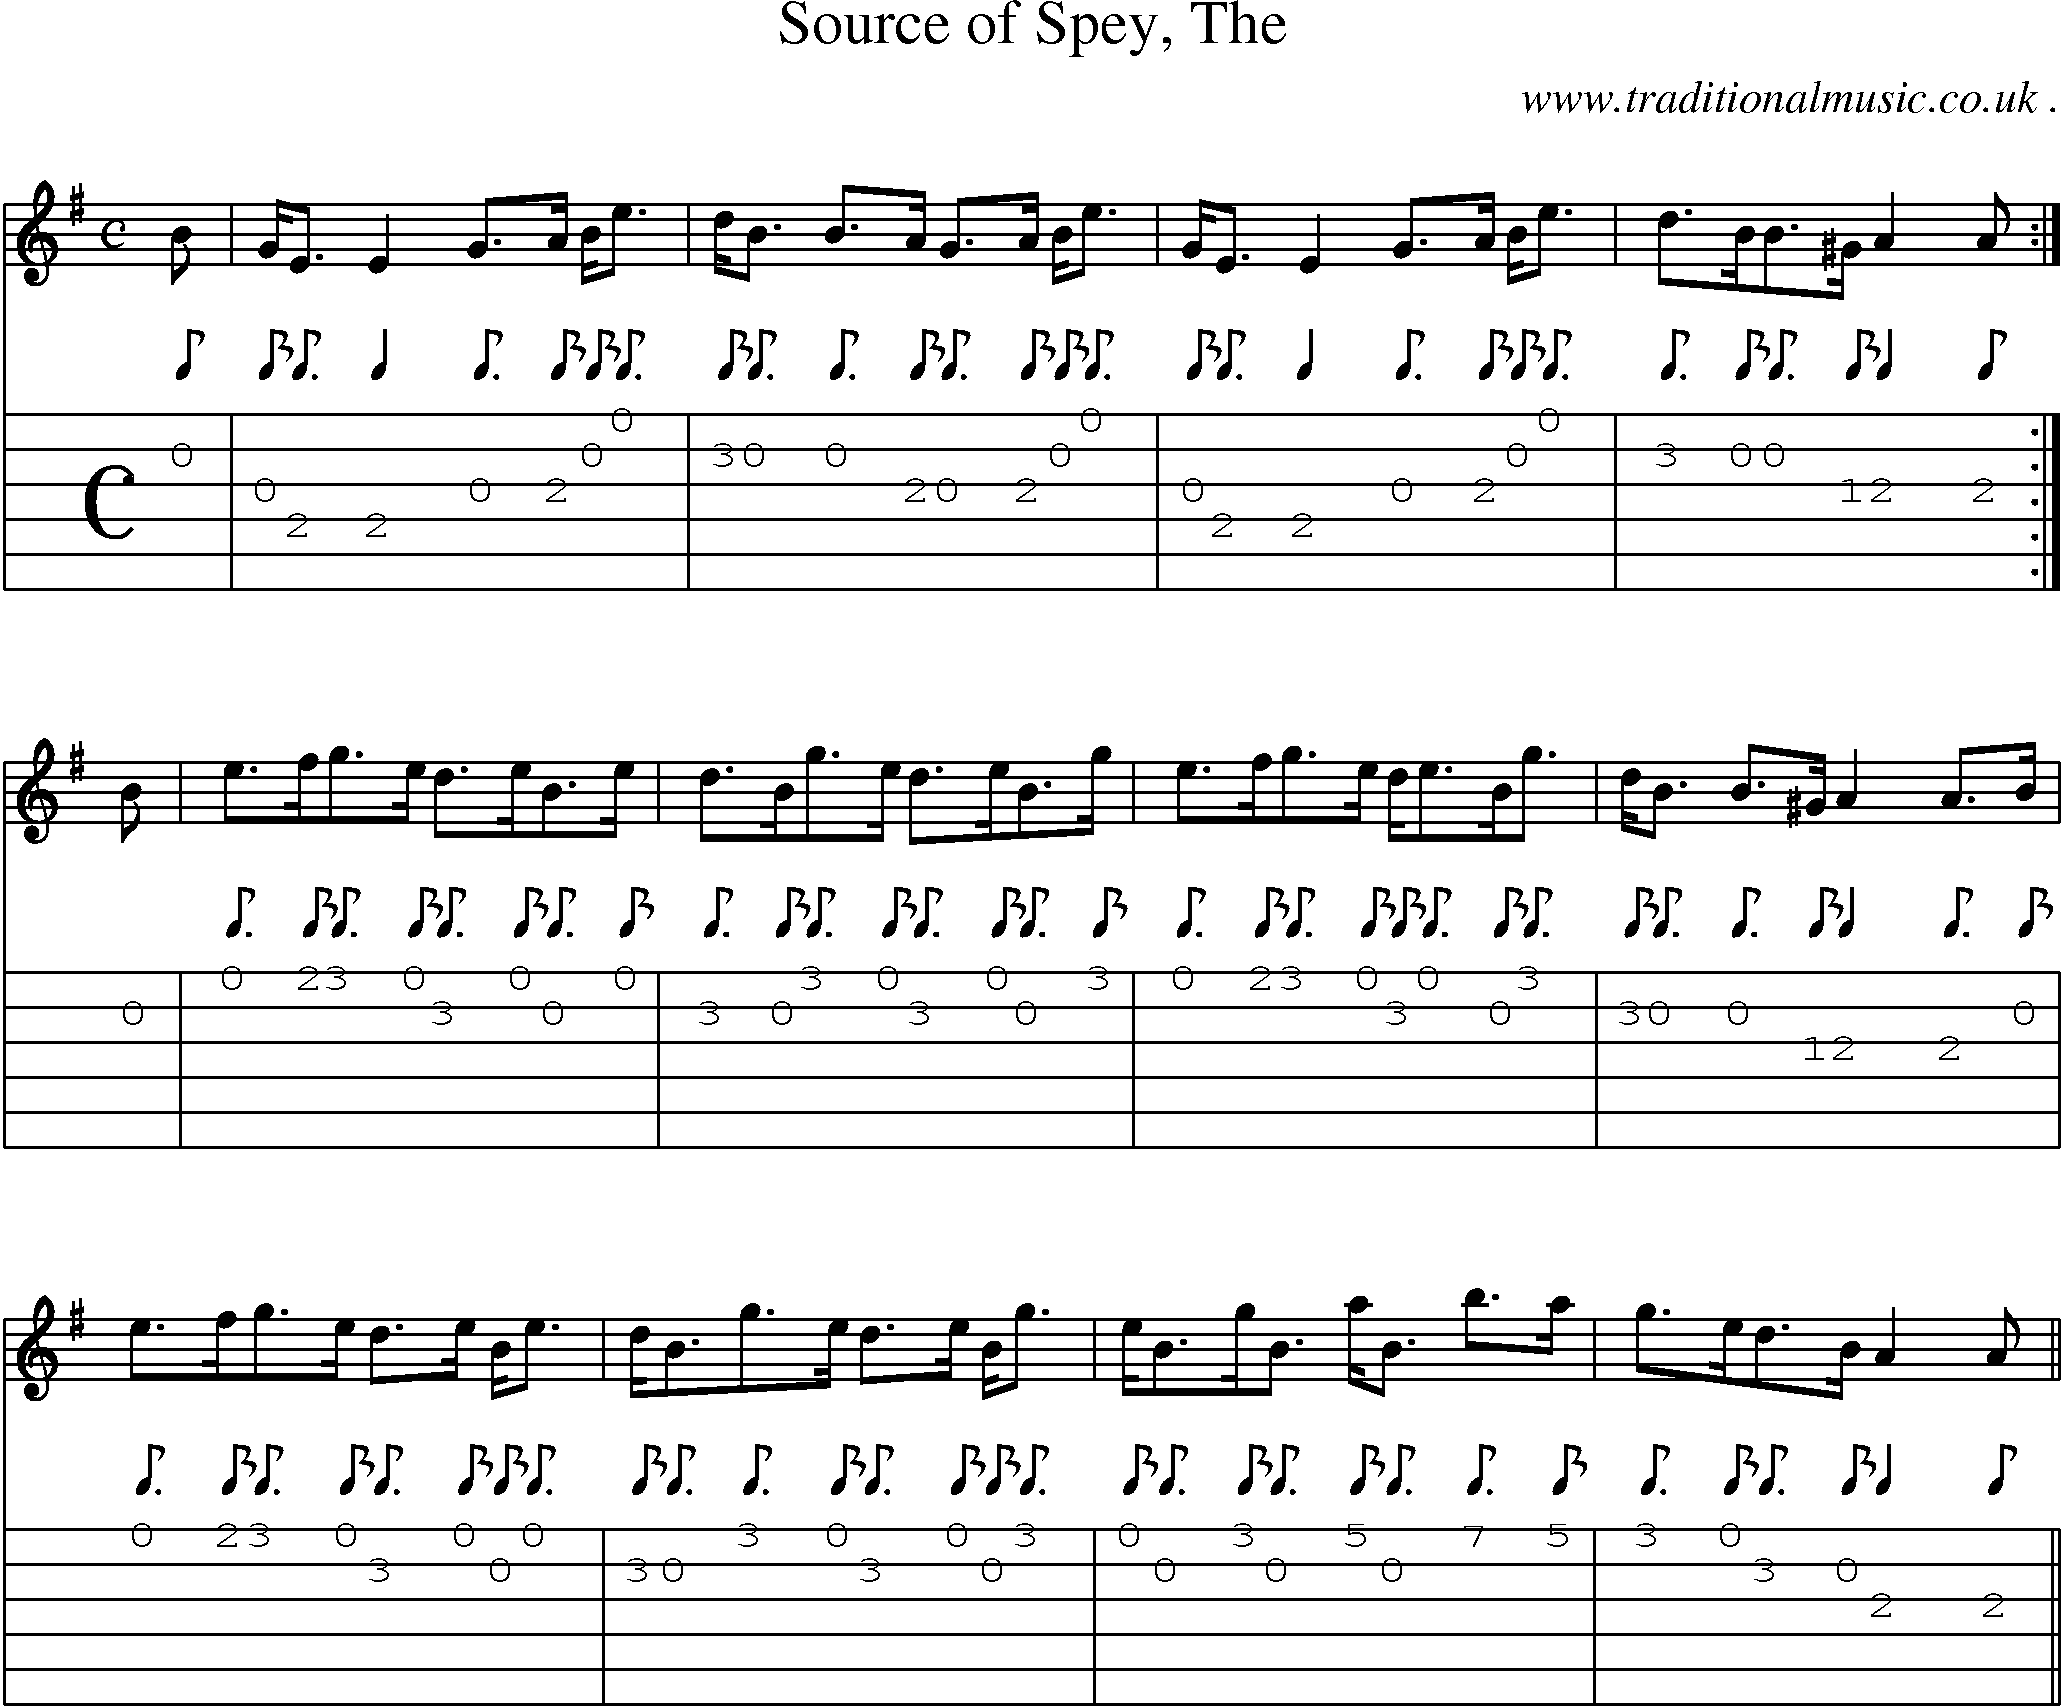 Sheet-music  score, Chords and Guitar Tabs for Source Of Spey The